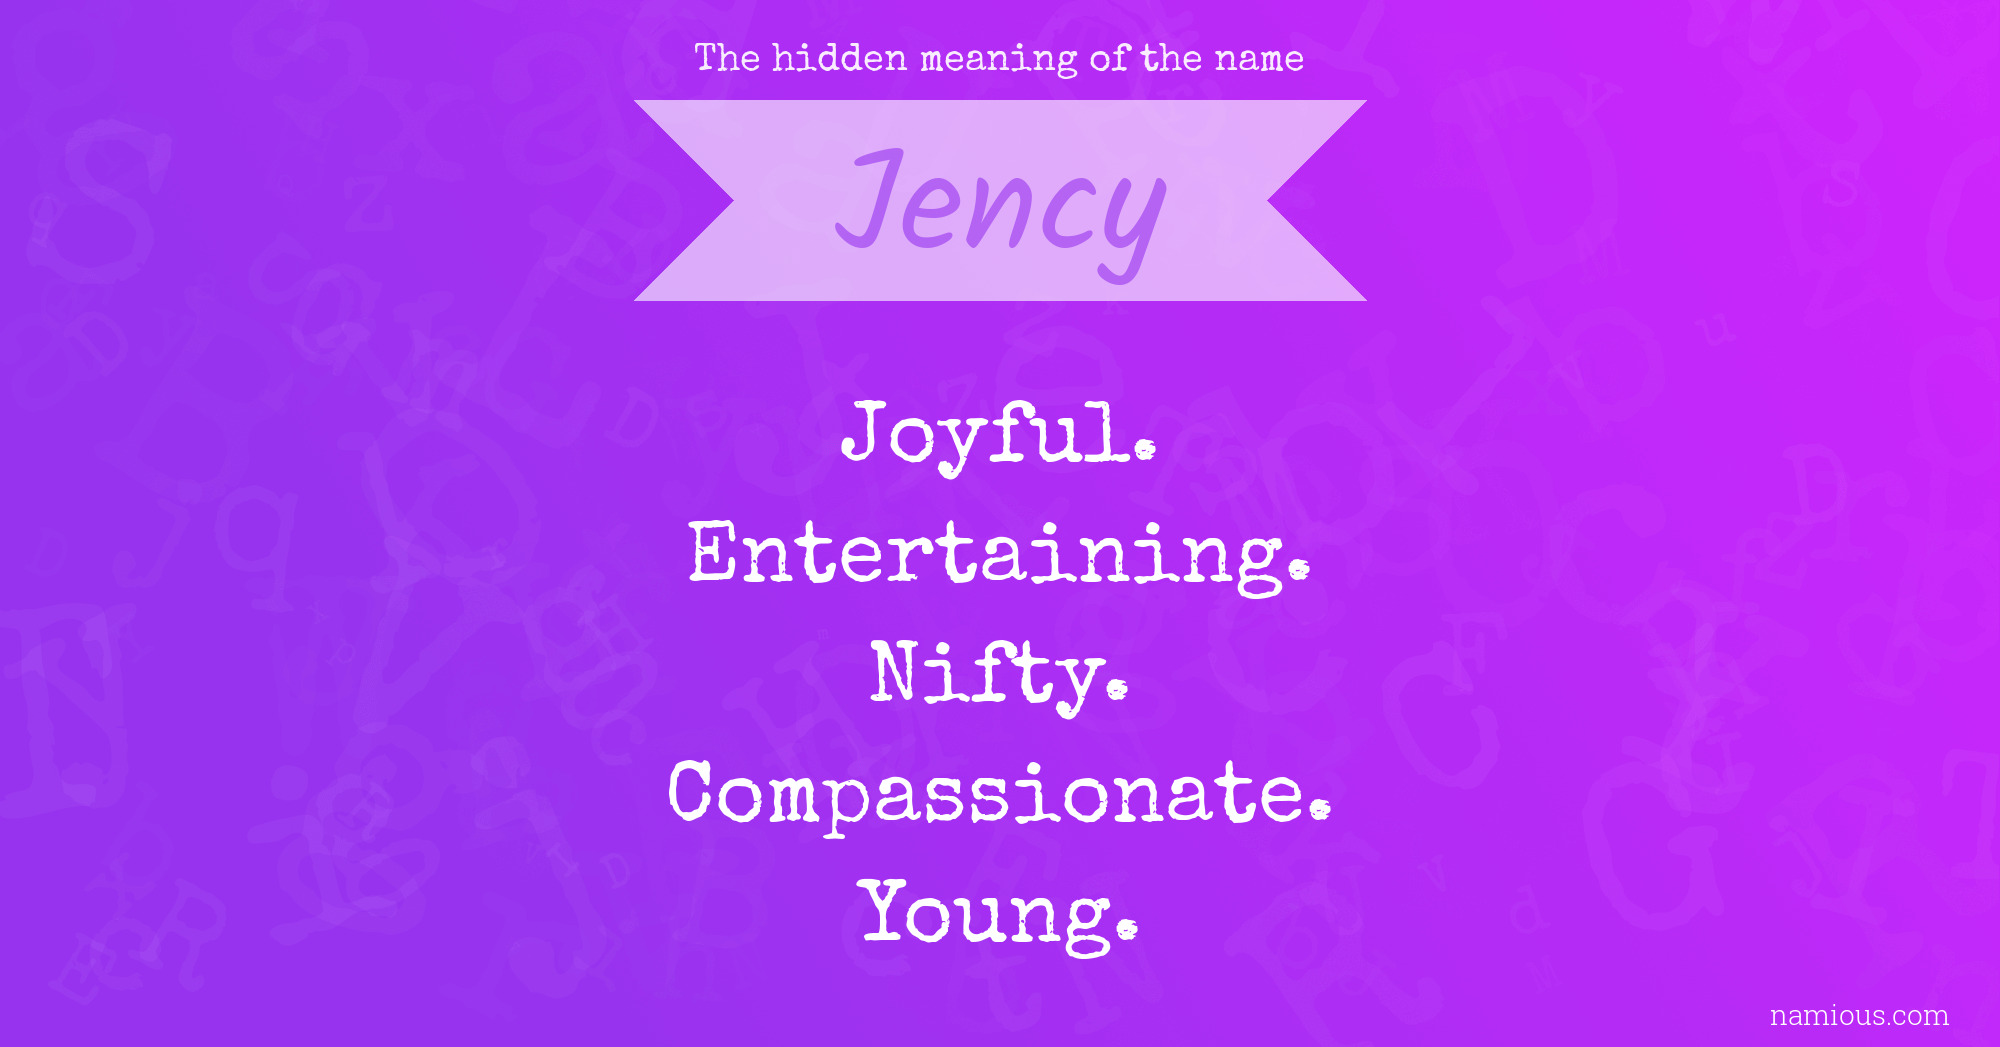 The hidden meaning of the name Jency